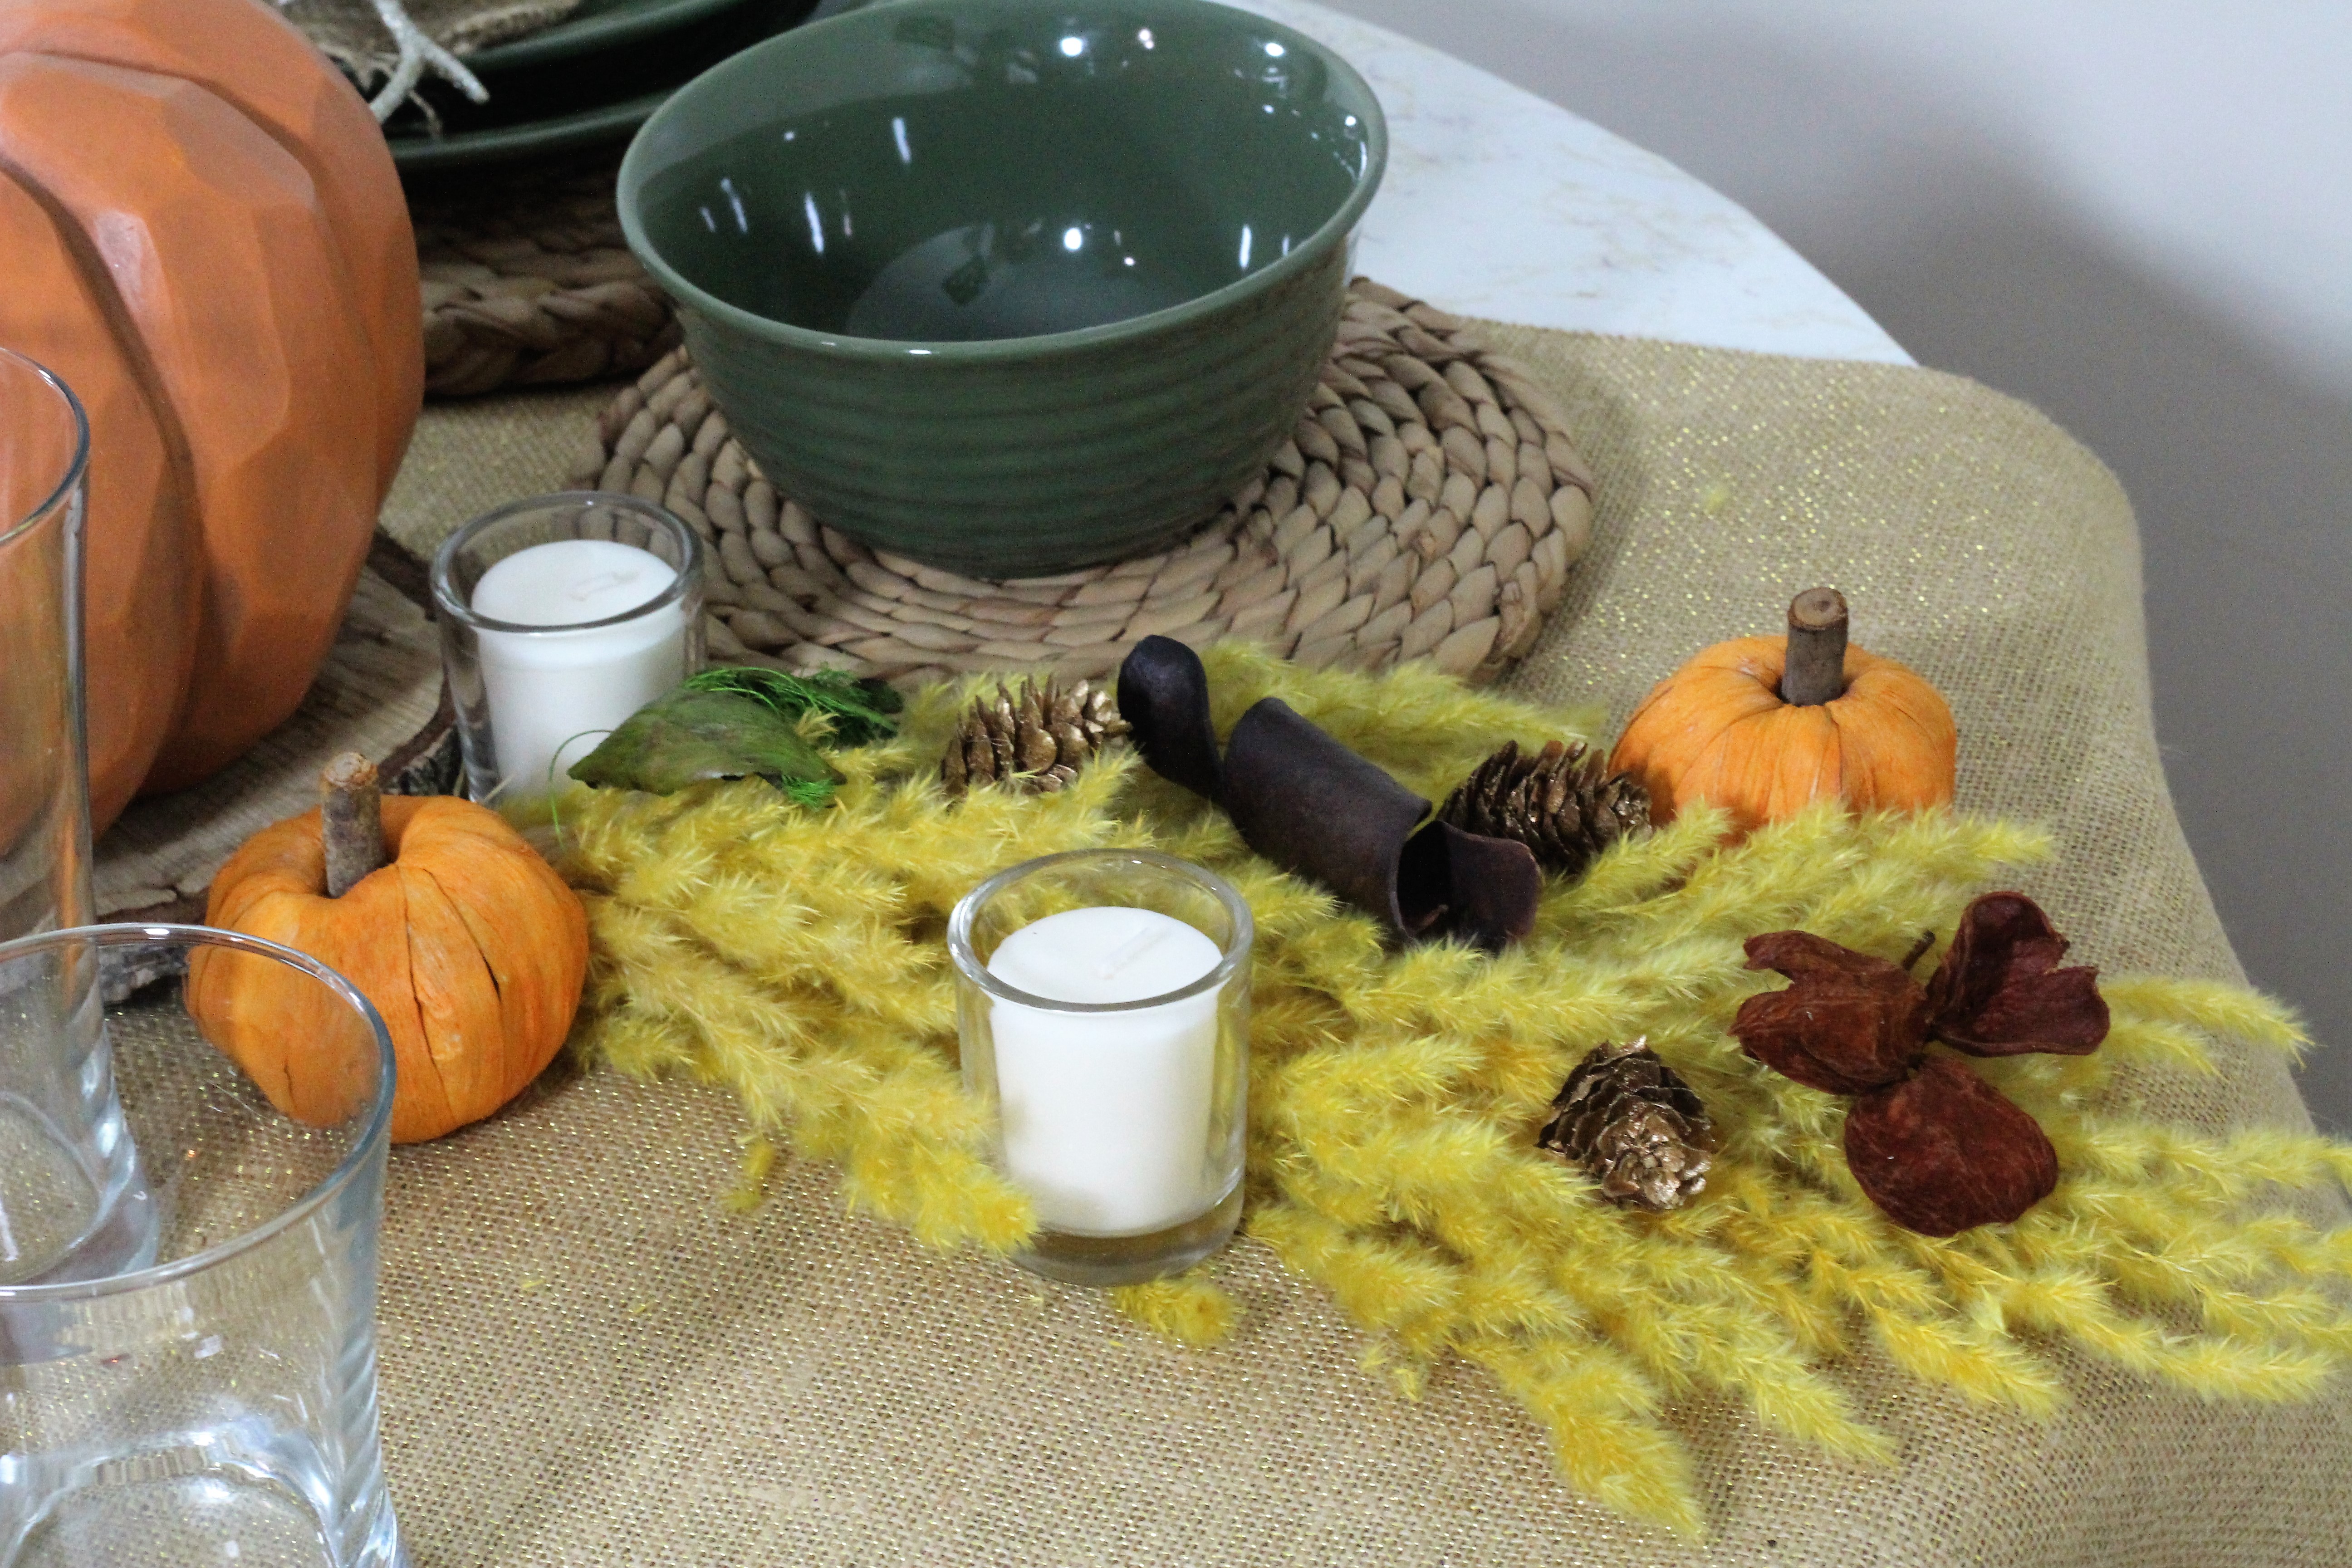 PictureAlicia Gibbs: Budget  Friendly Thanksgiving Tablescape for Two #chicafashionblog